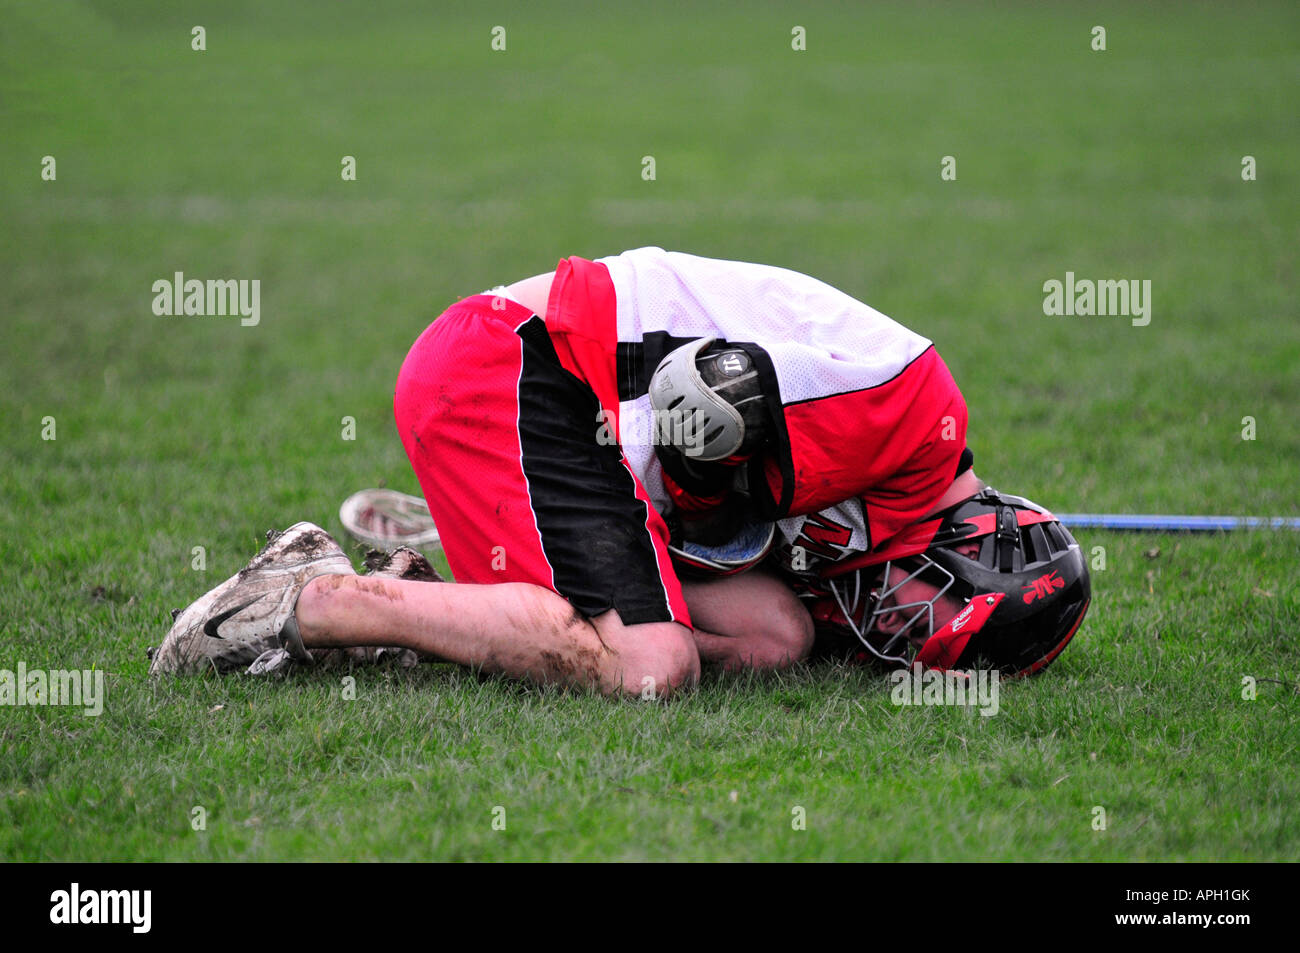 lacrosse player in pain Stock Photo - Alamy